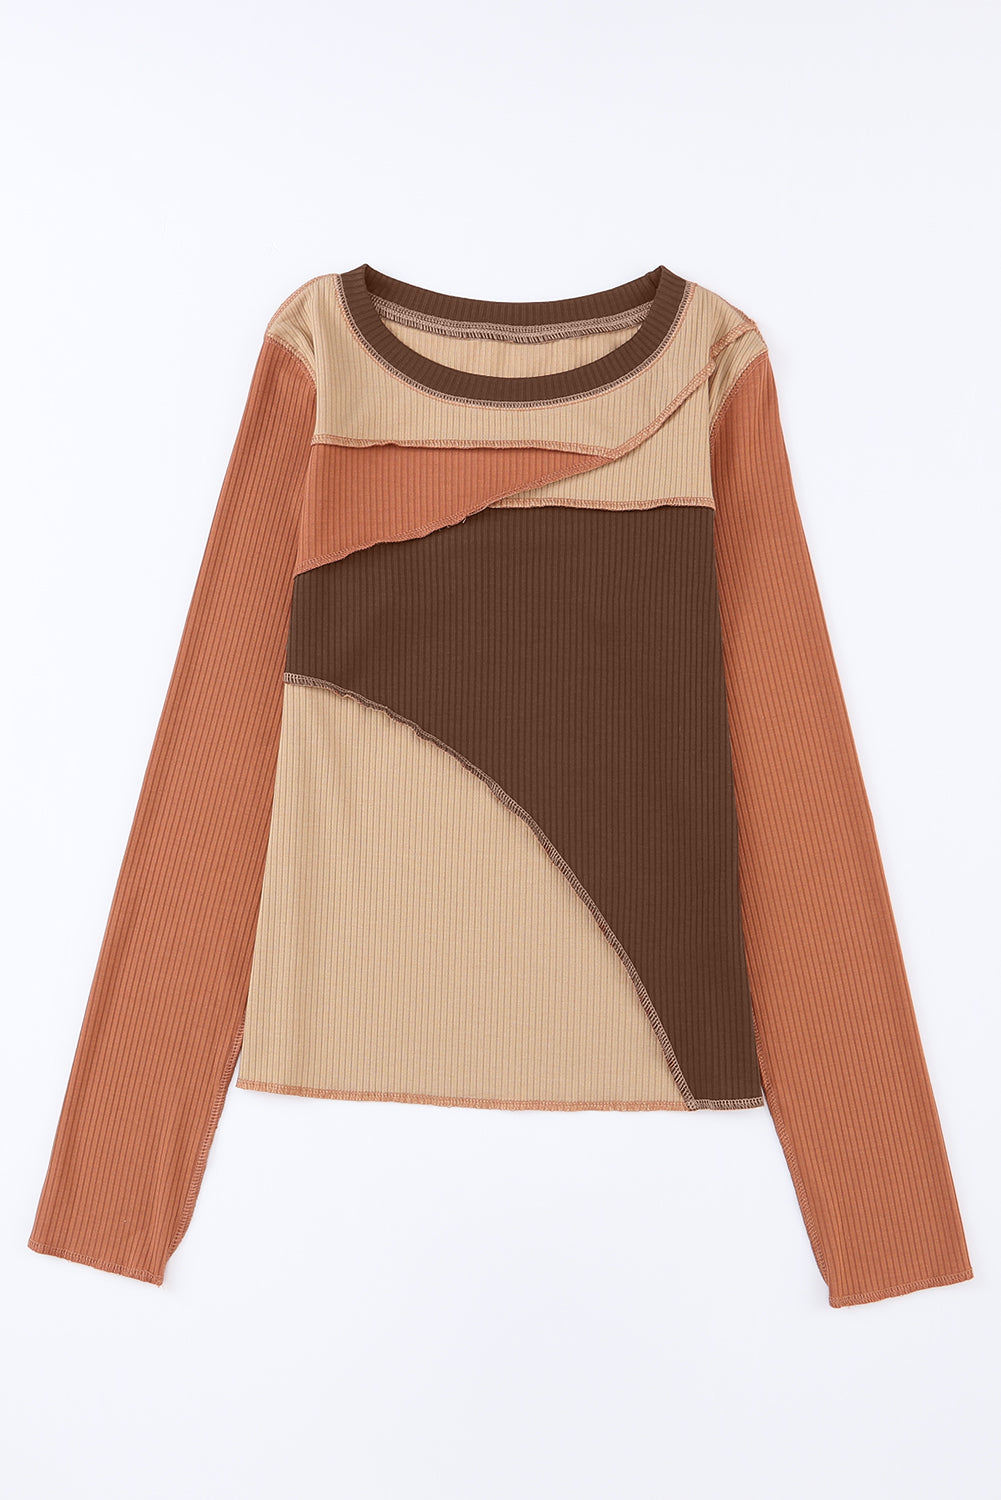 Cali Chic Brown Expose Seam Color Block Ribbed Knit Top